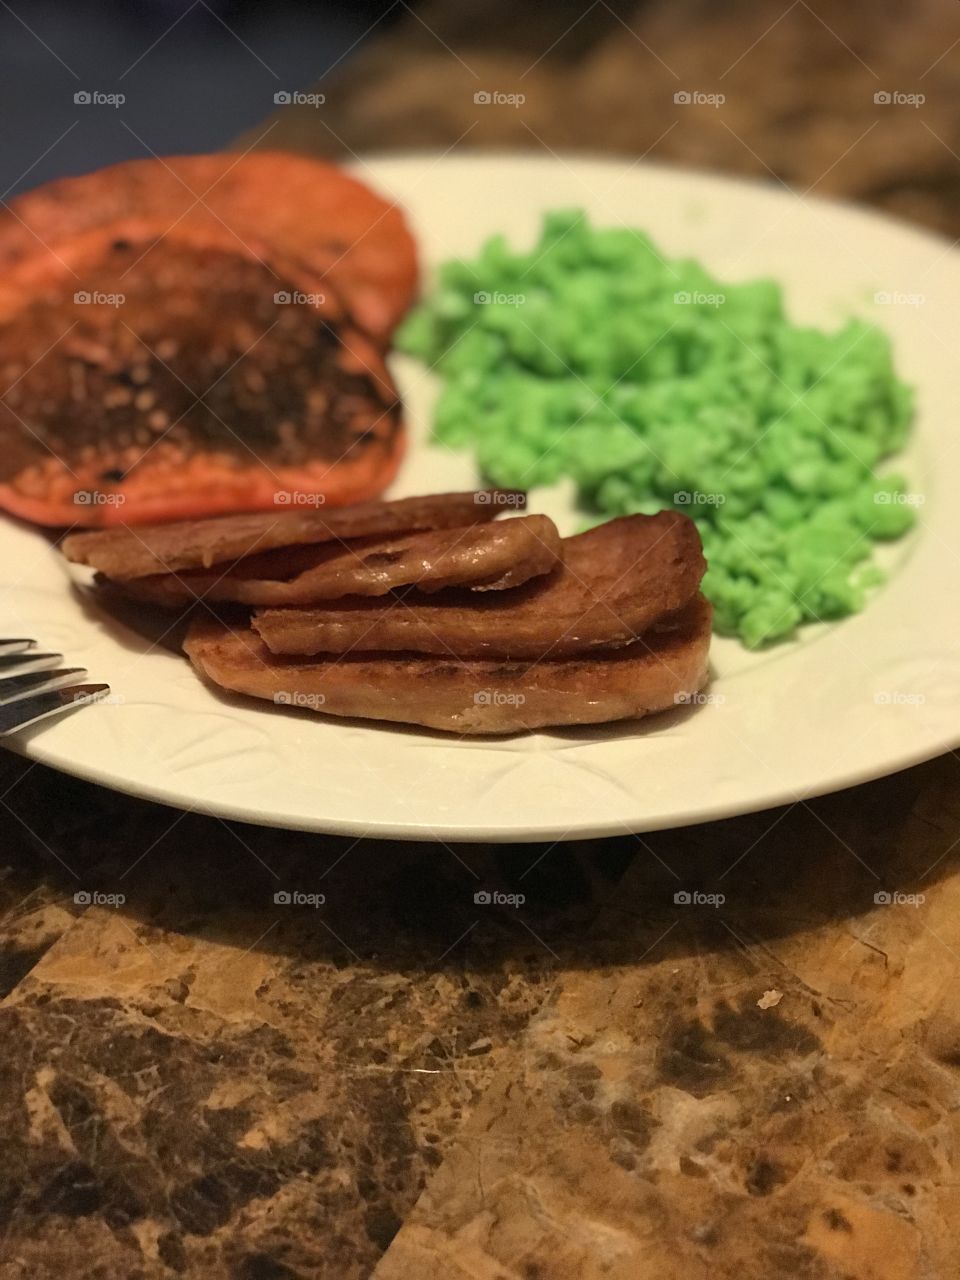 Green eggs and Ham 